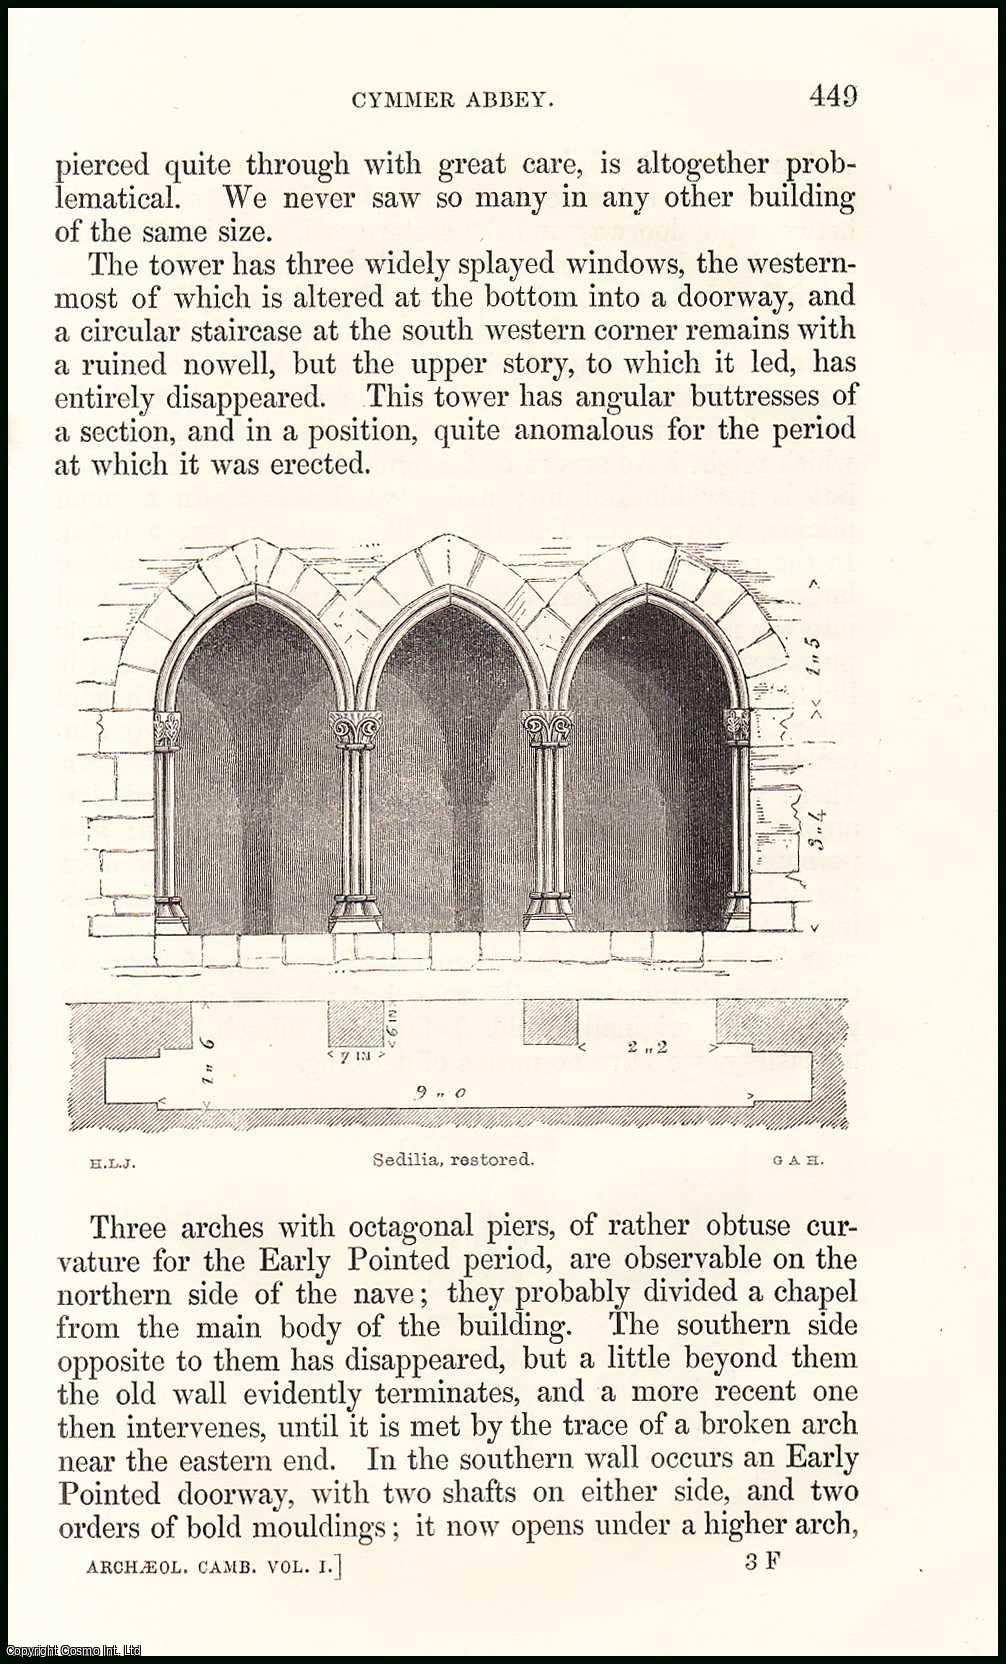 H.L.J. - Cymmer Abbey, Merionethshire. An original article from the Archaeologia Cambrensis, a Record of The Antiquities of Wales & its Marches, 1846.